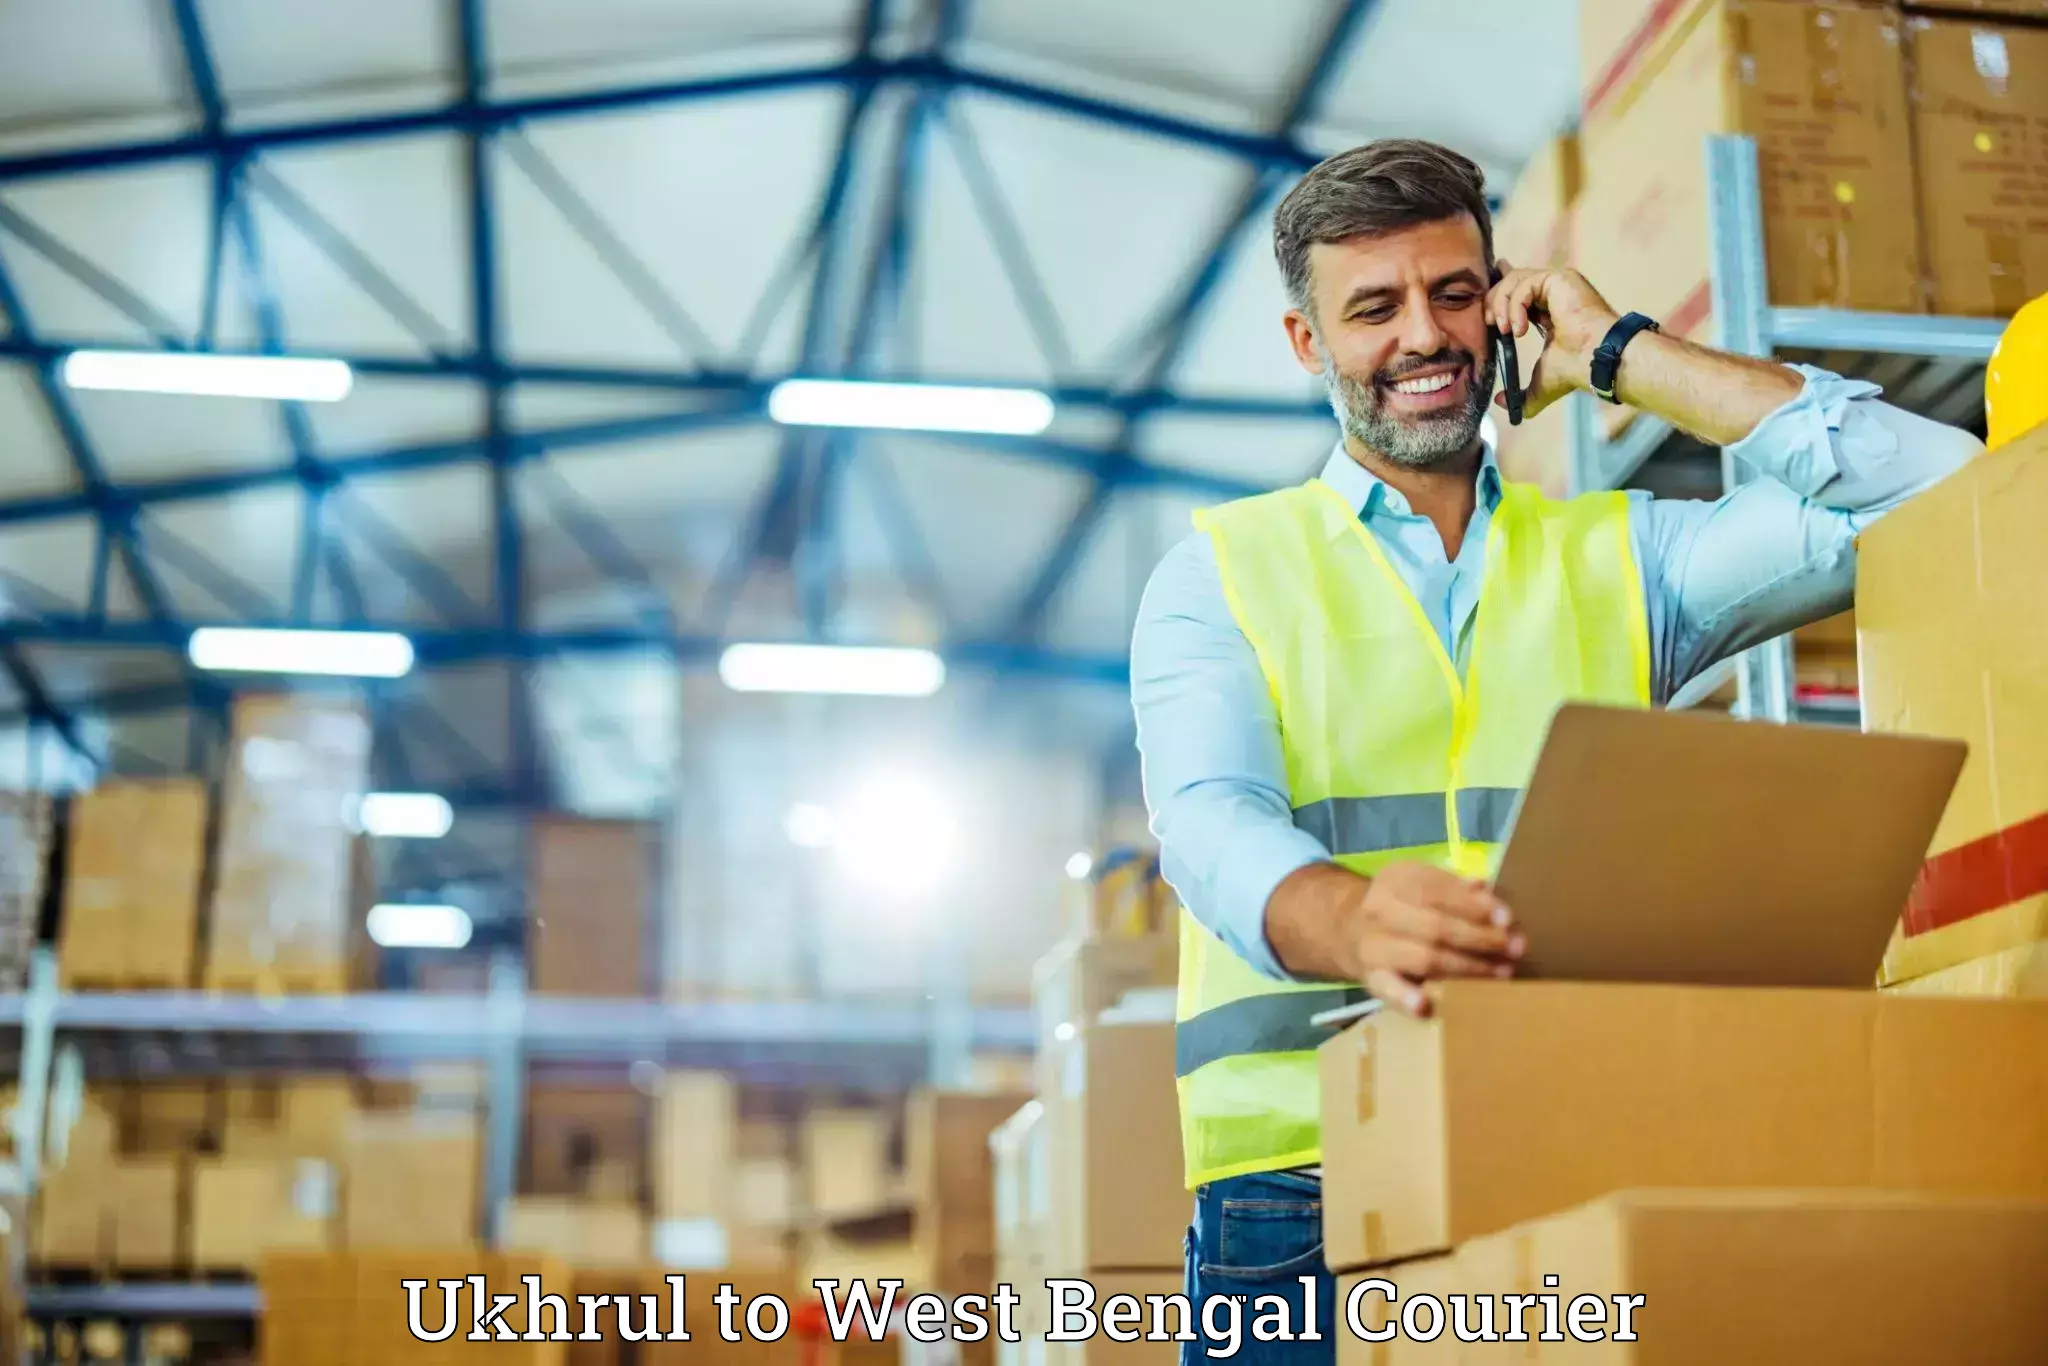 Luggage shipment specialists Ukhrul to West Bengal